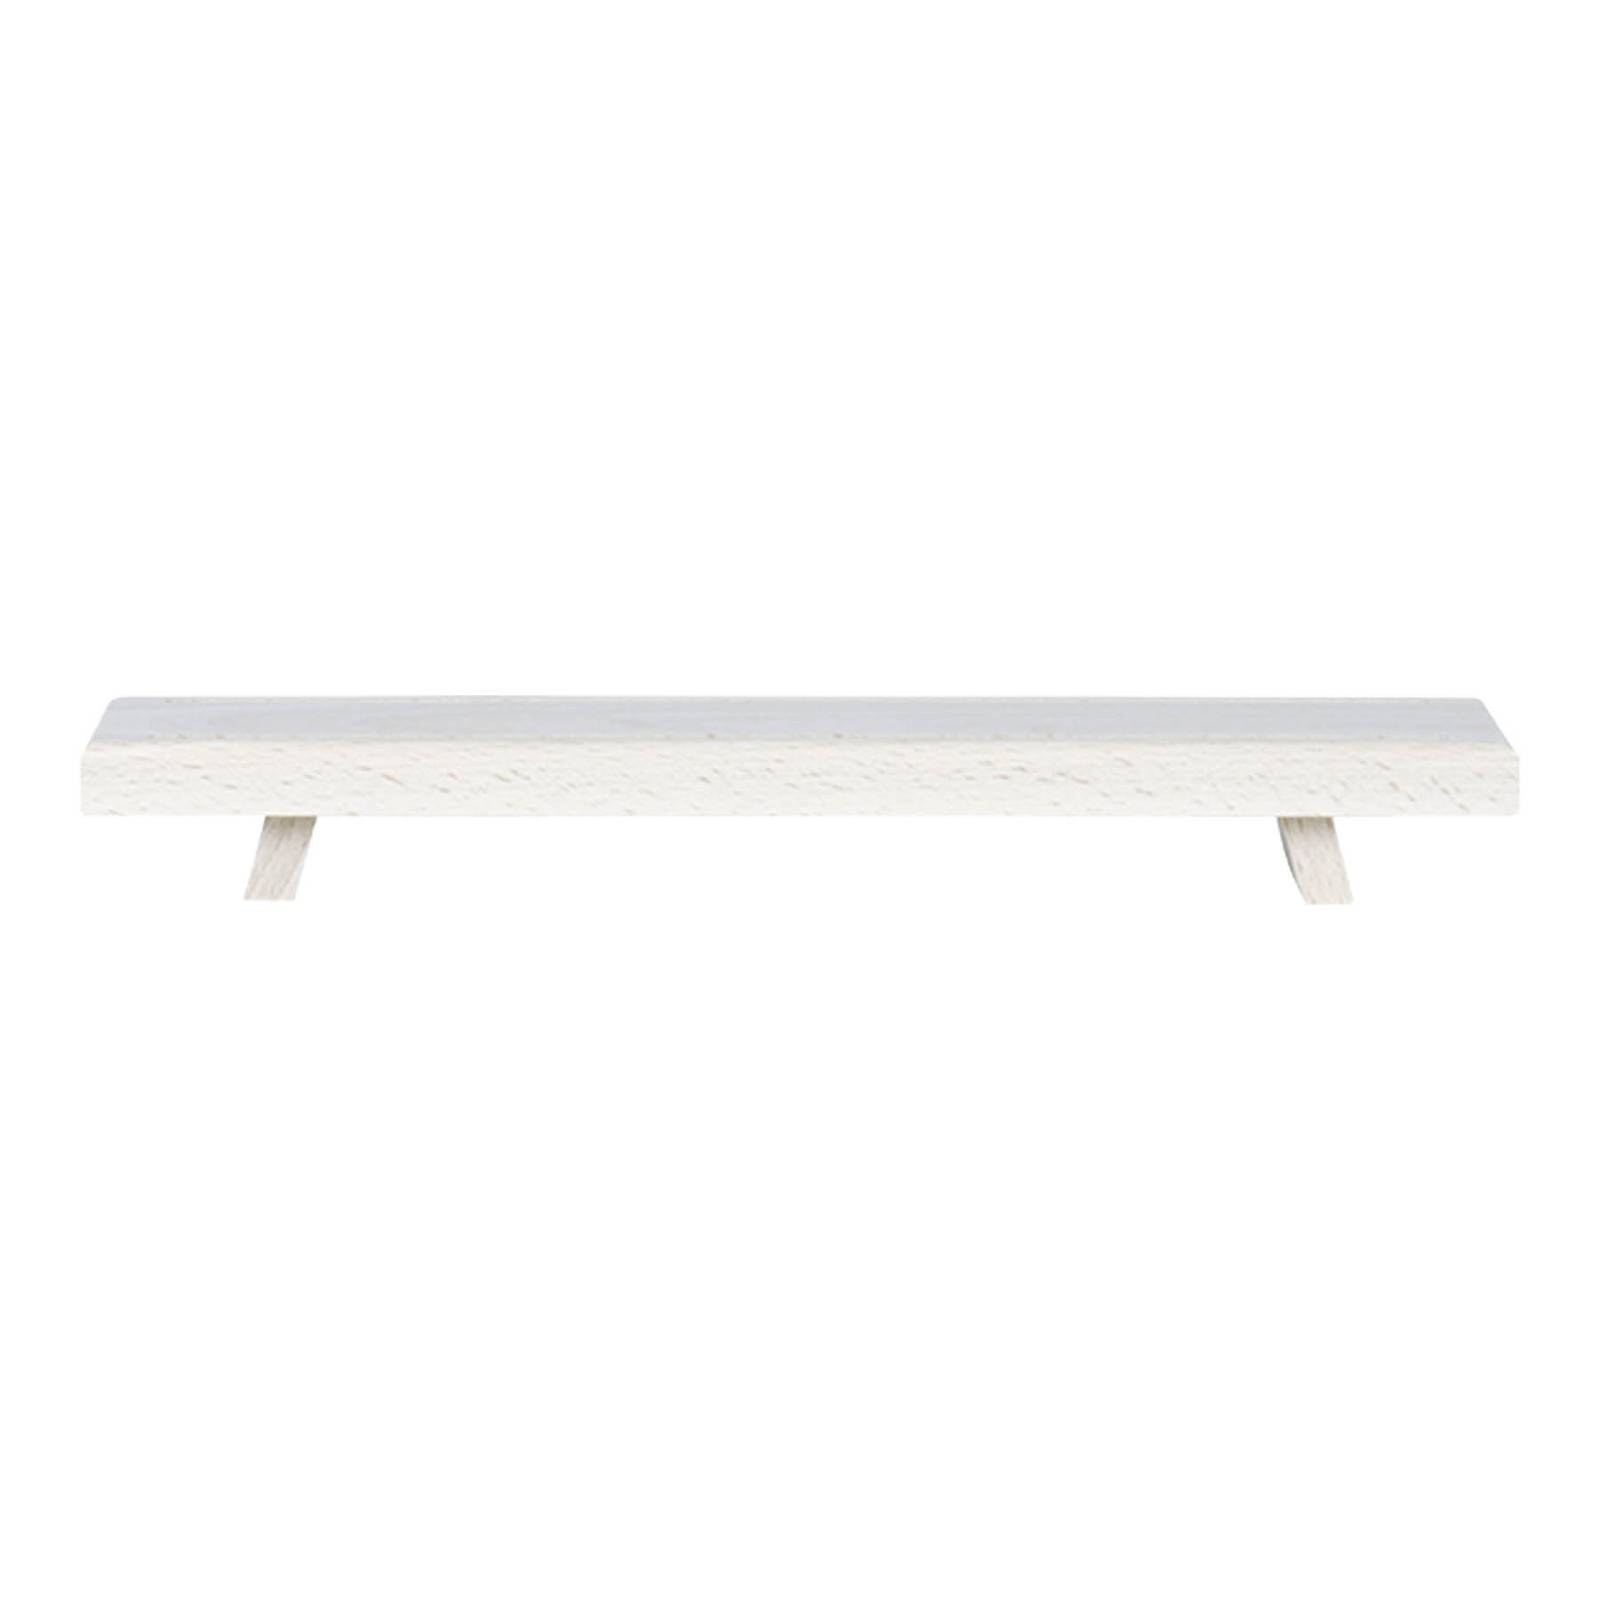 Window sill candle arch elevation, length 60 cm